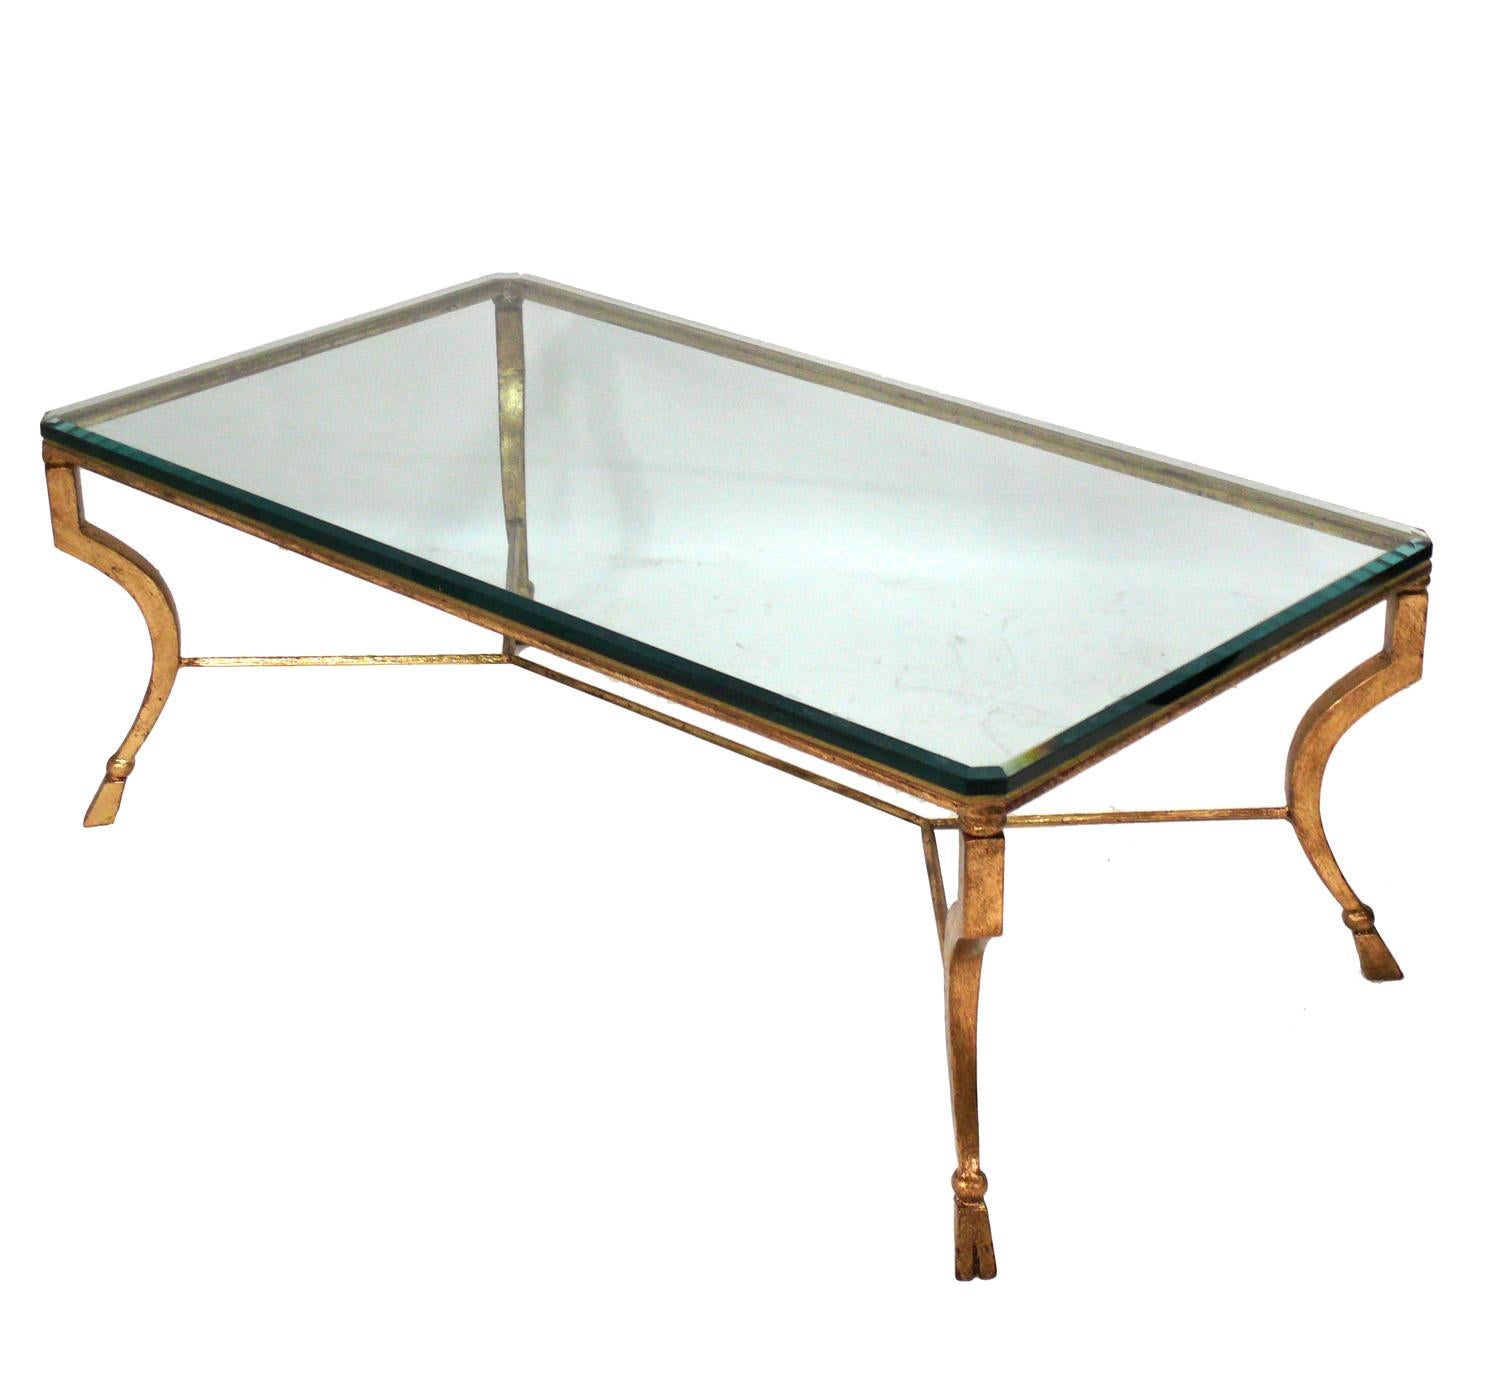 Neoclassical French Gilt Iron Coffee Table Attributed to Maison Ramsay For Sale